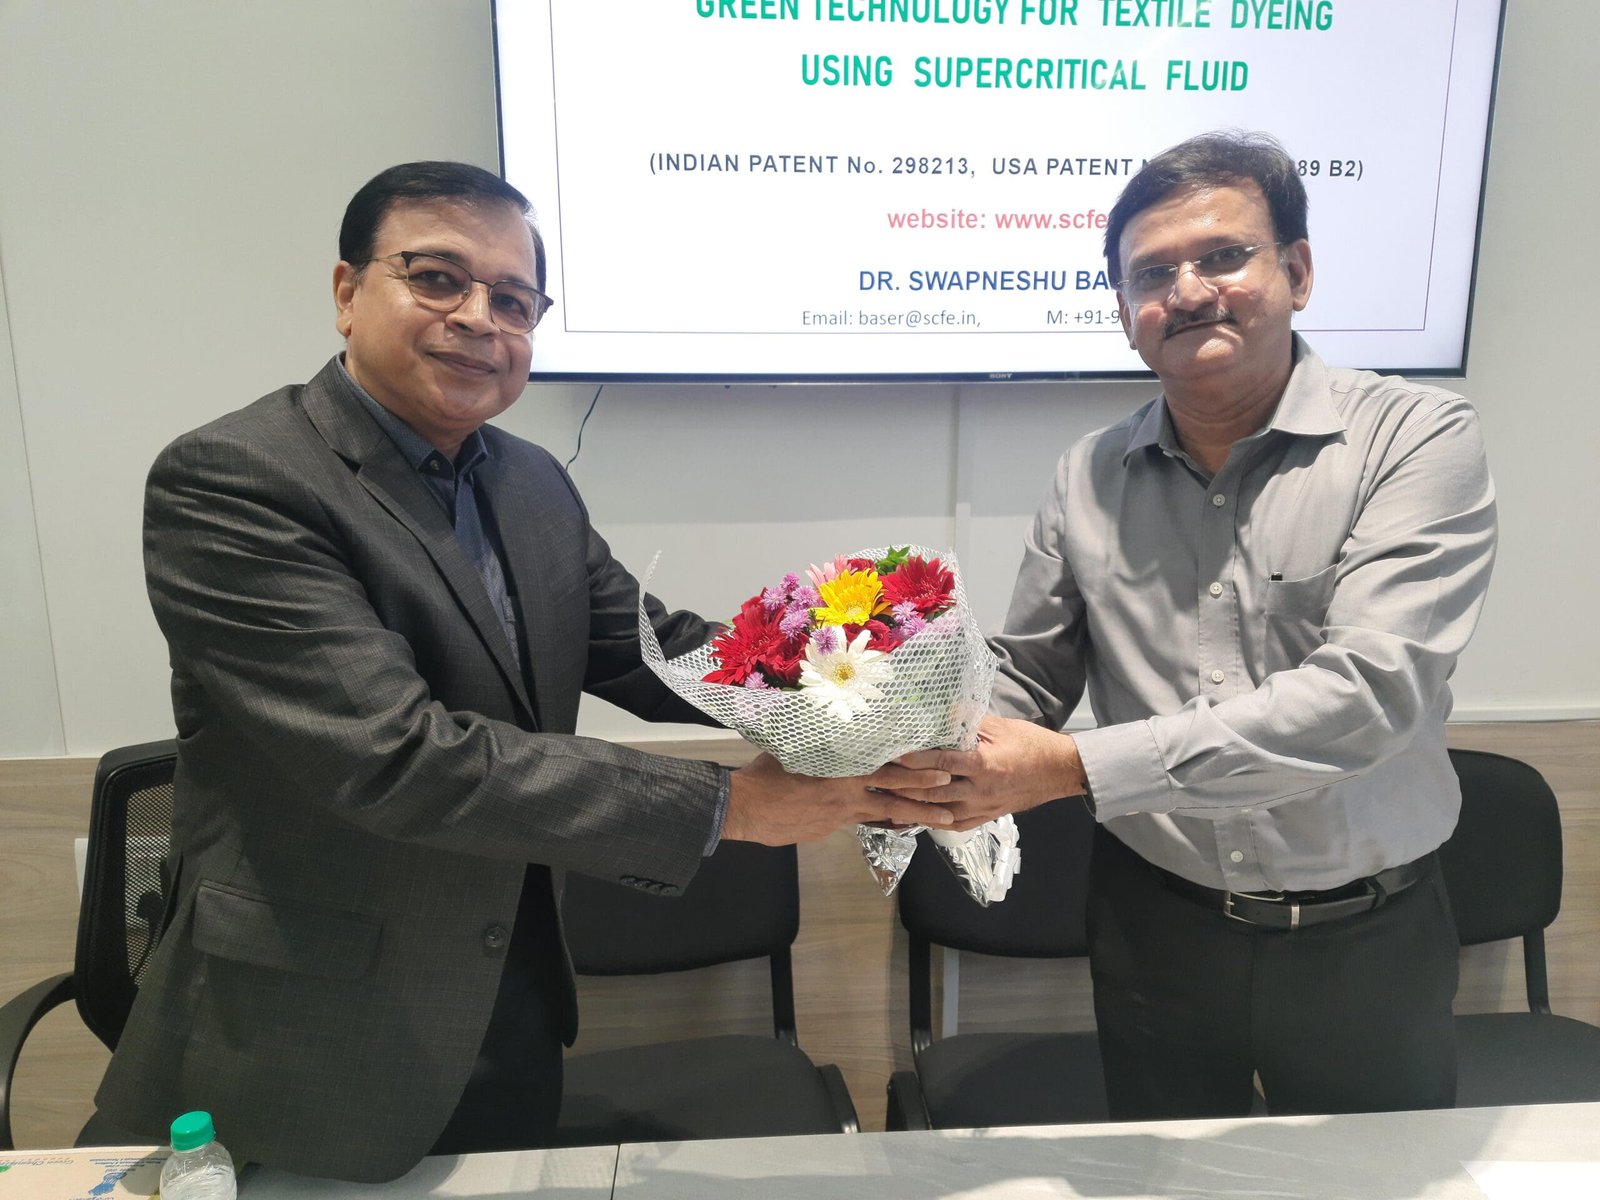 GREEN TECHNOLOGY FOR TEXTILE DYEING USING SUPERCRITICAL FLUID